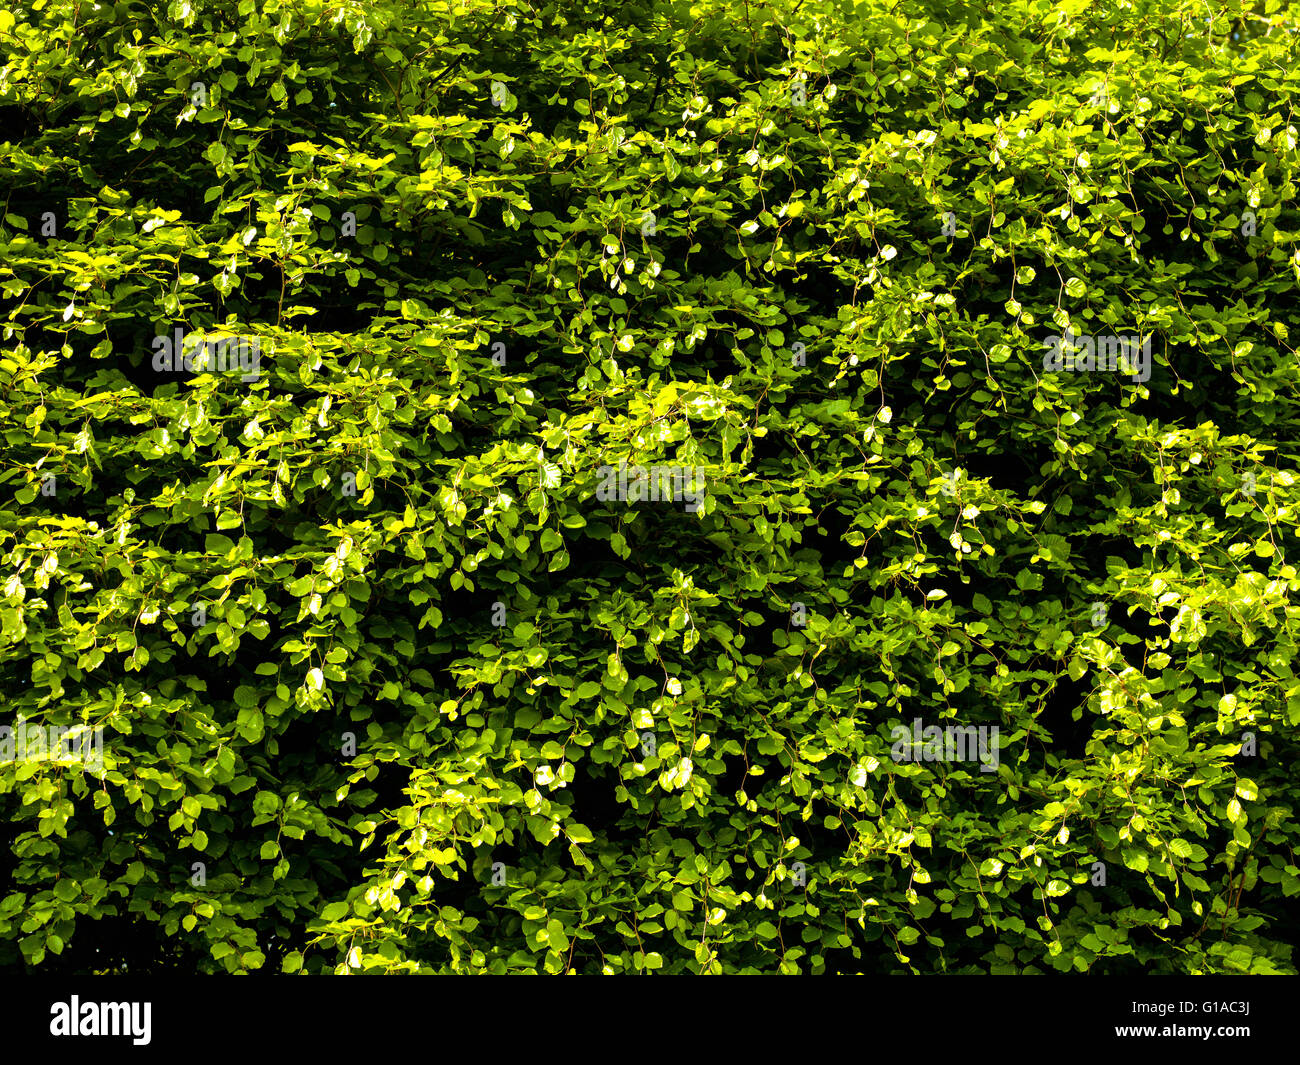 Dense Beech Hedge Row in Springtime With New Leaves Growing Stock Photo